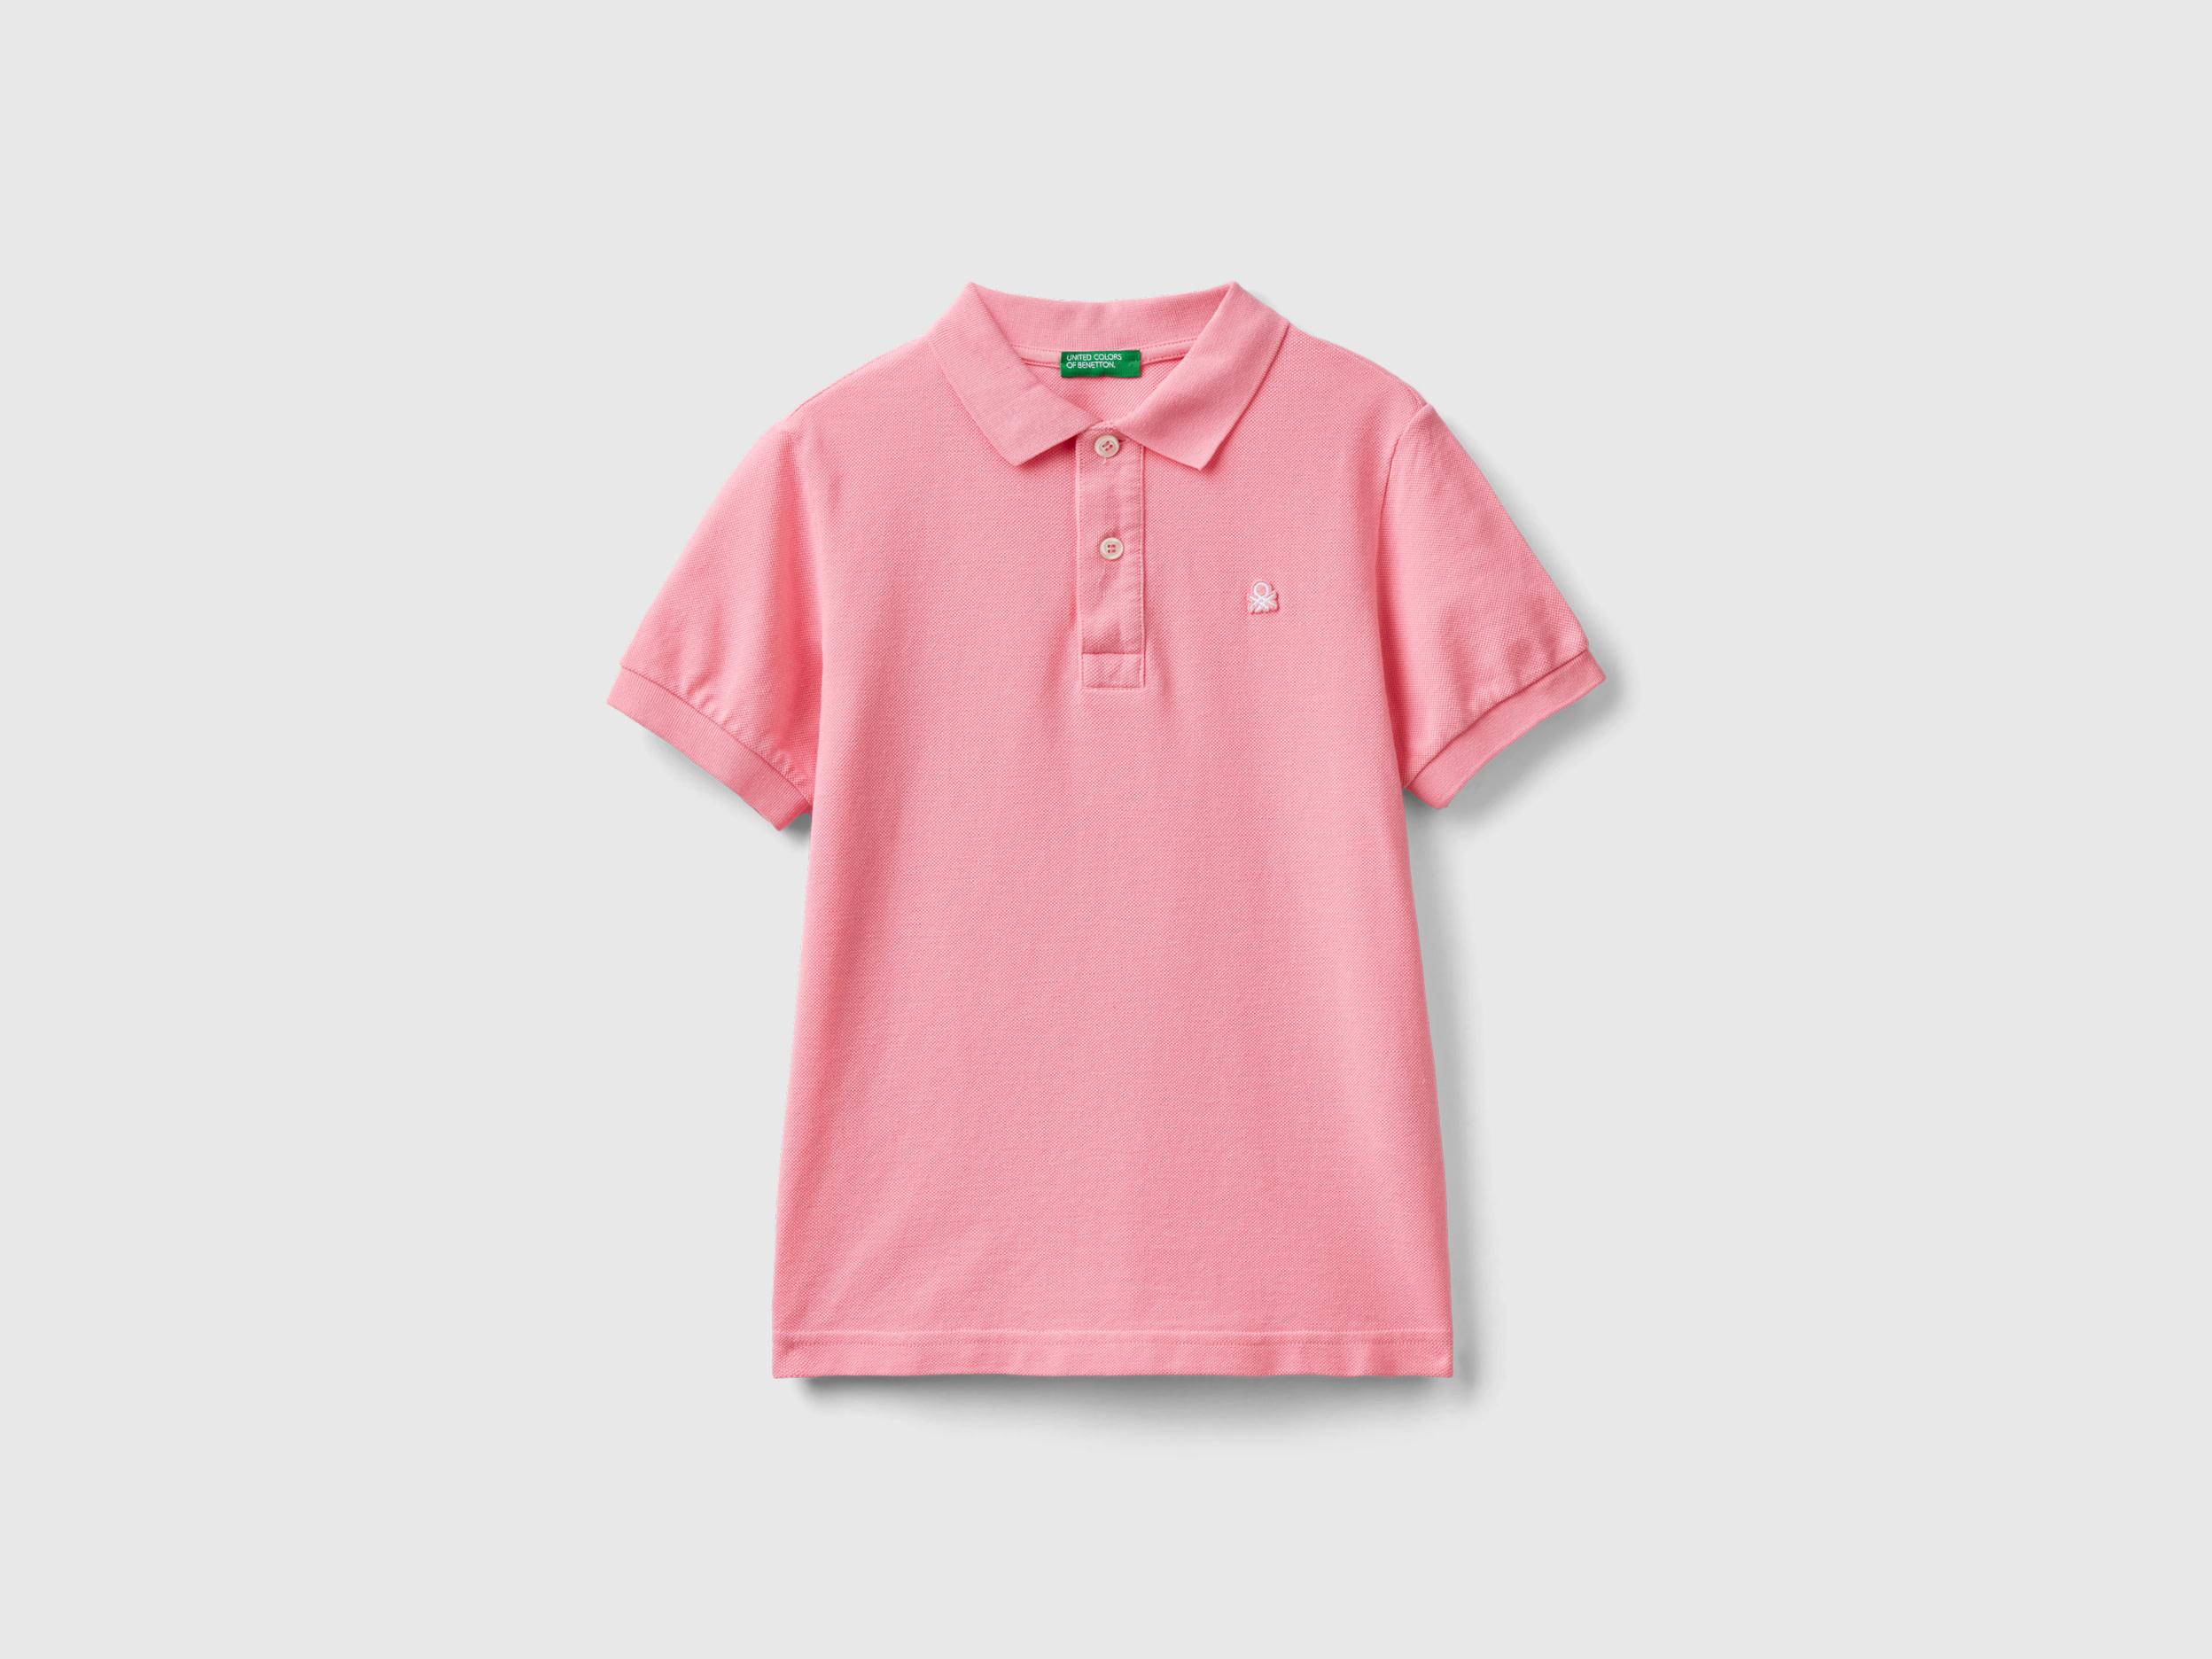 Image of Benetton, Slim Fit Polo In 100% Organic Cotton, size XL, Pink, Kids